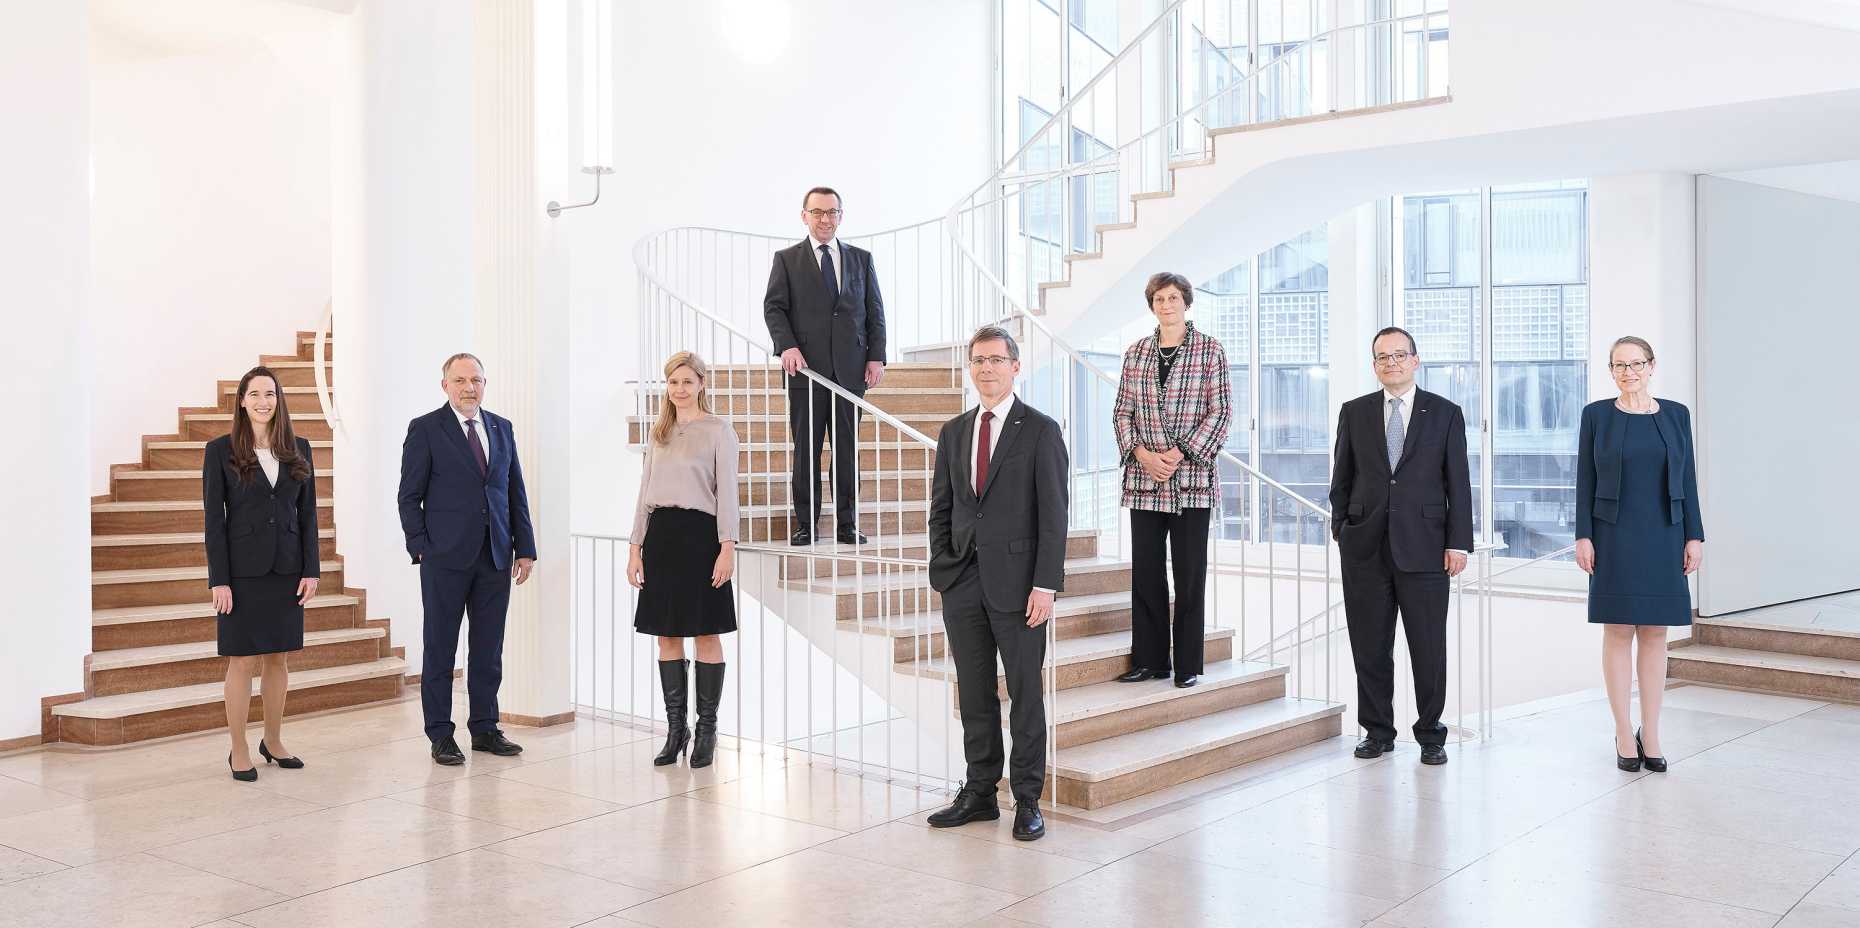 The Executive Board of ETH Zurich